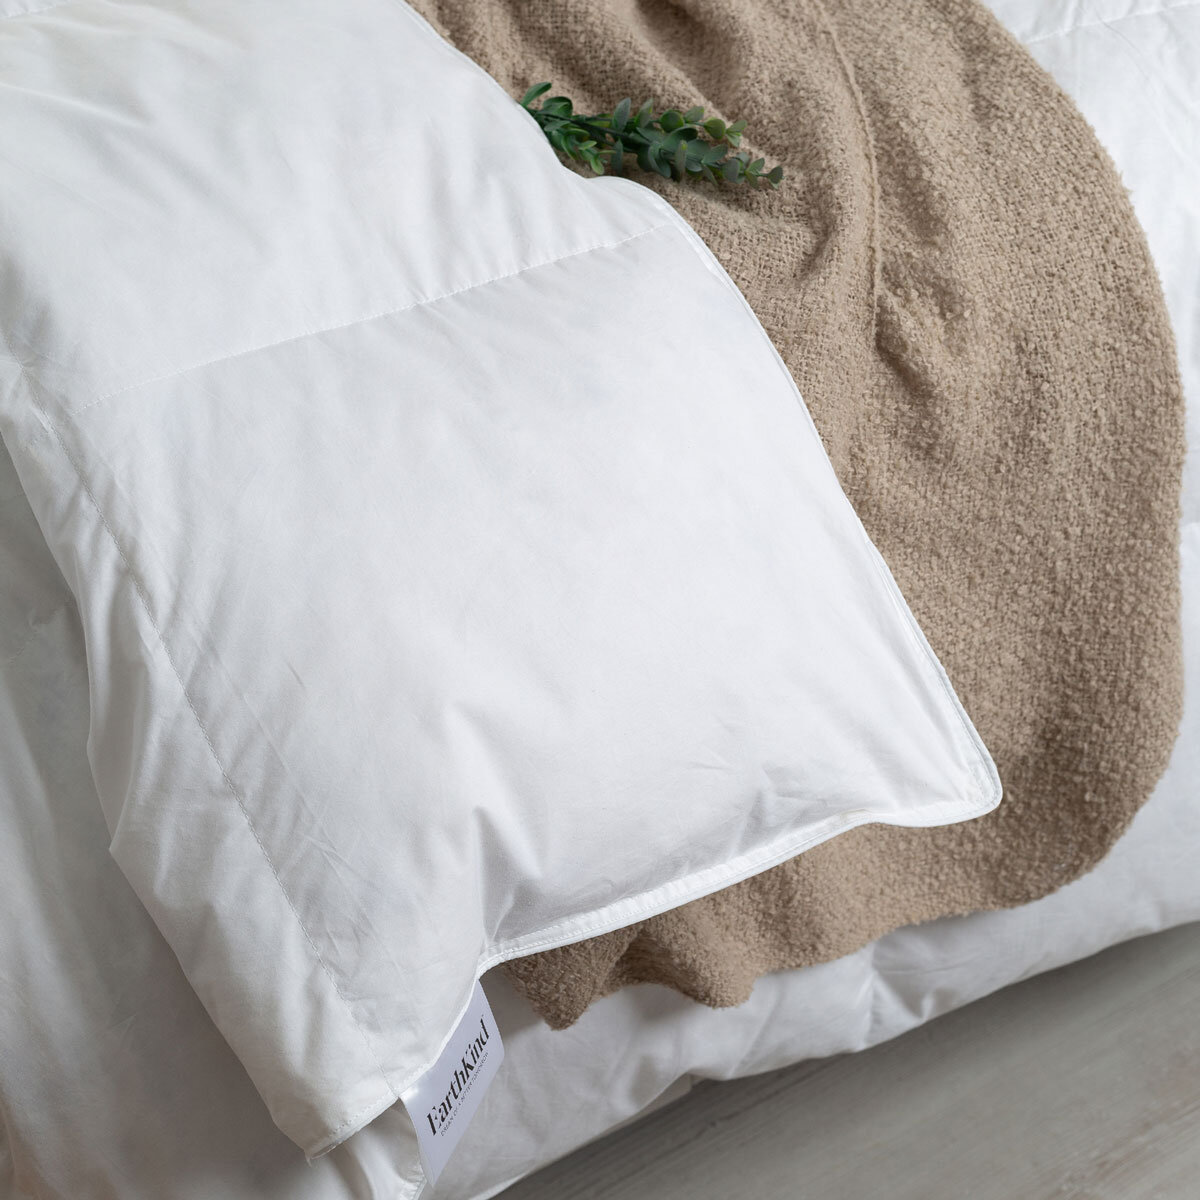 Earthkind recycled down duvet